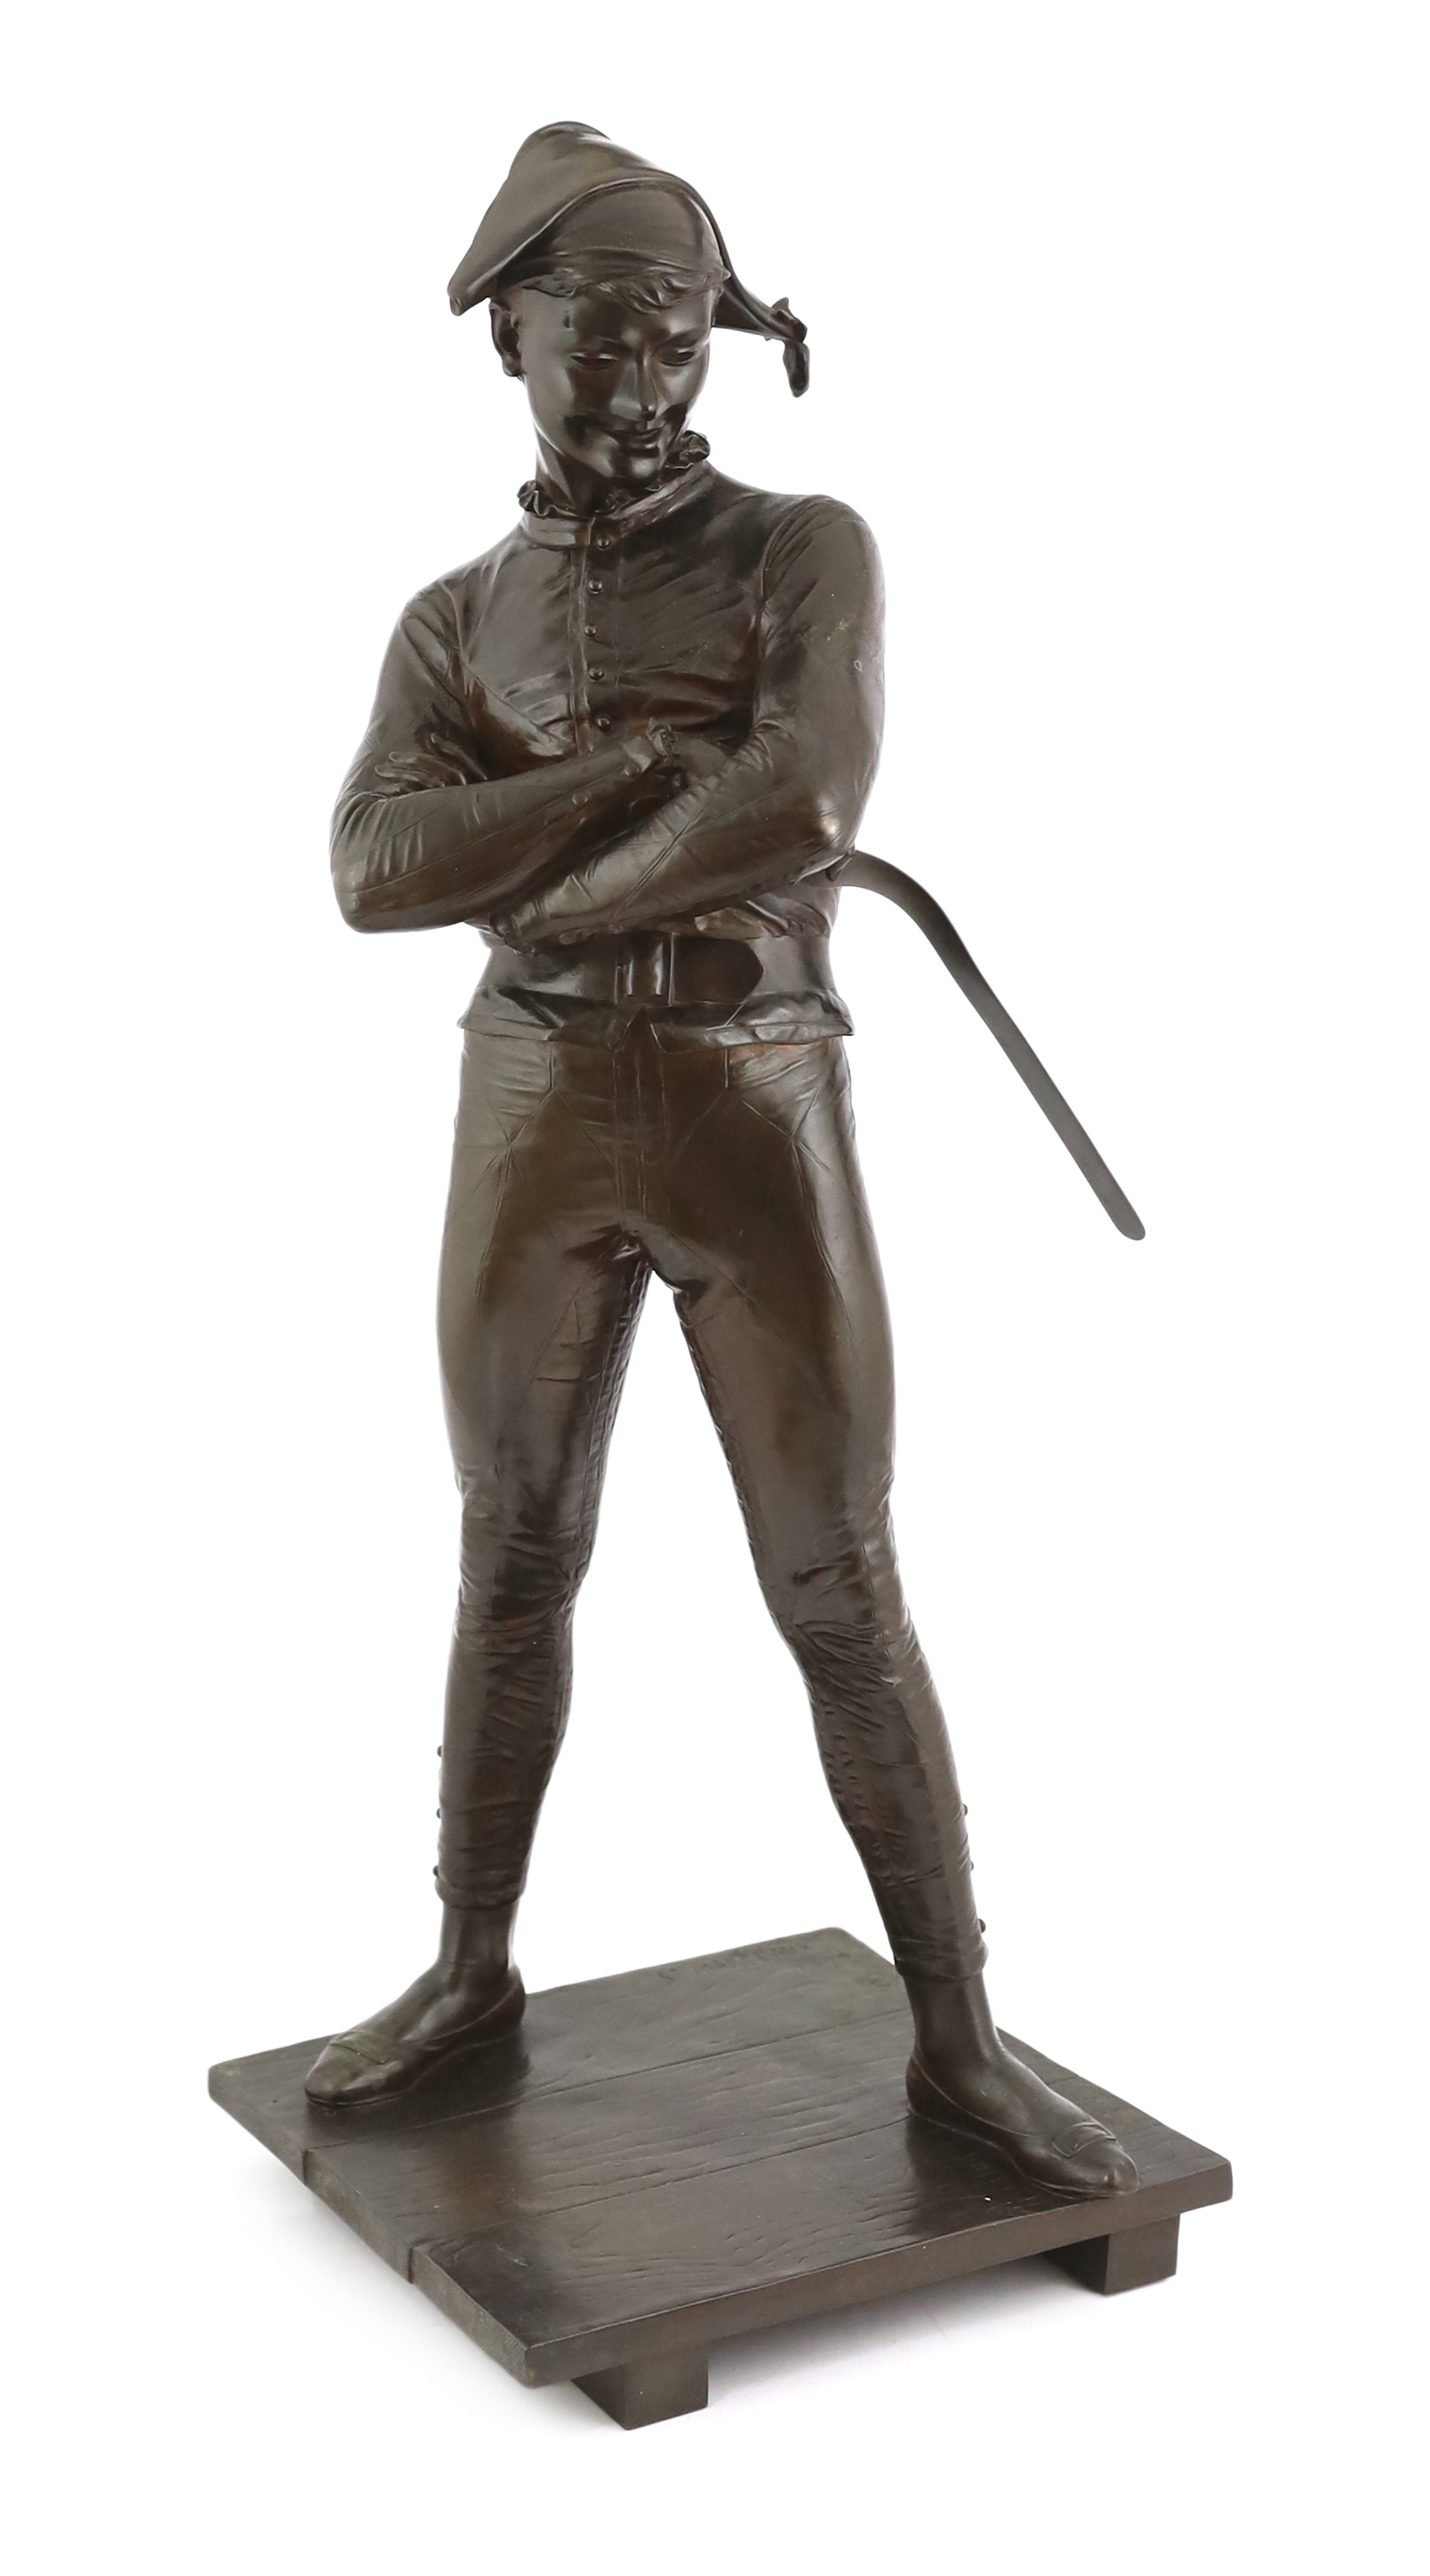 Charles Rene de St Marceaux (French, 1845-1915), a bronze figure of Harlequin